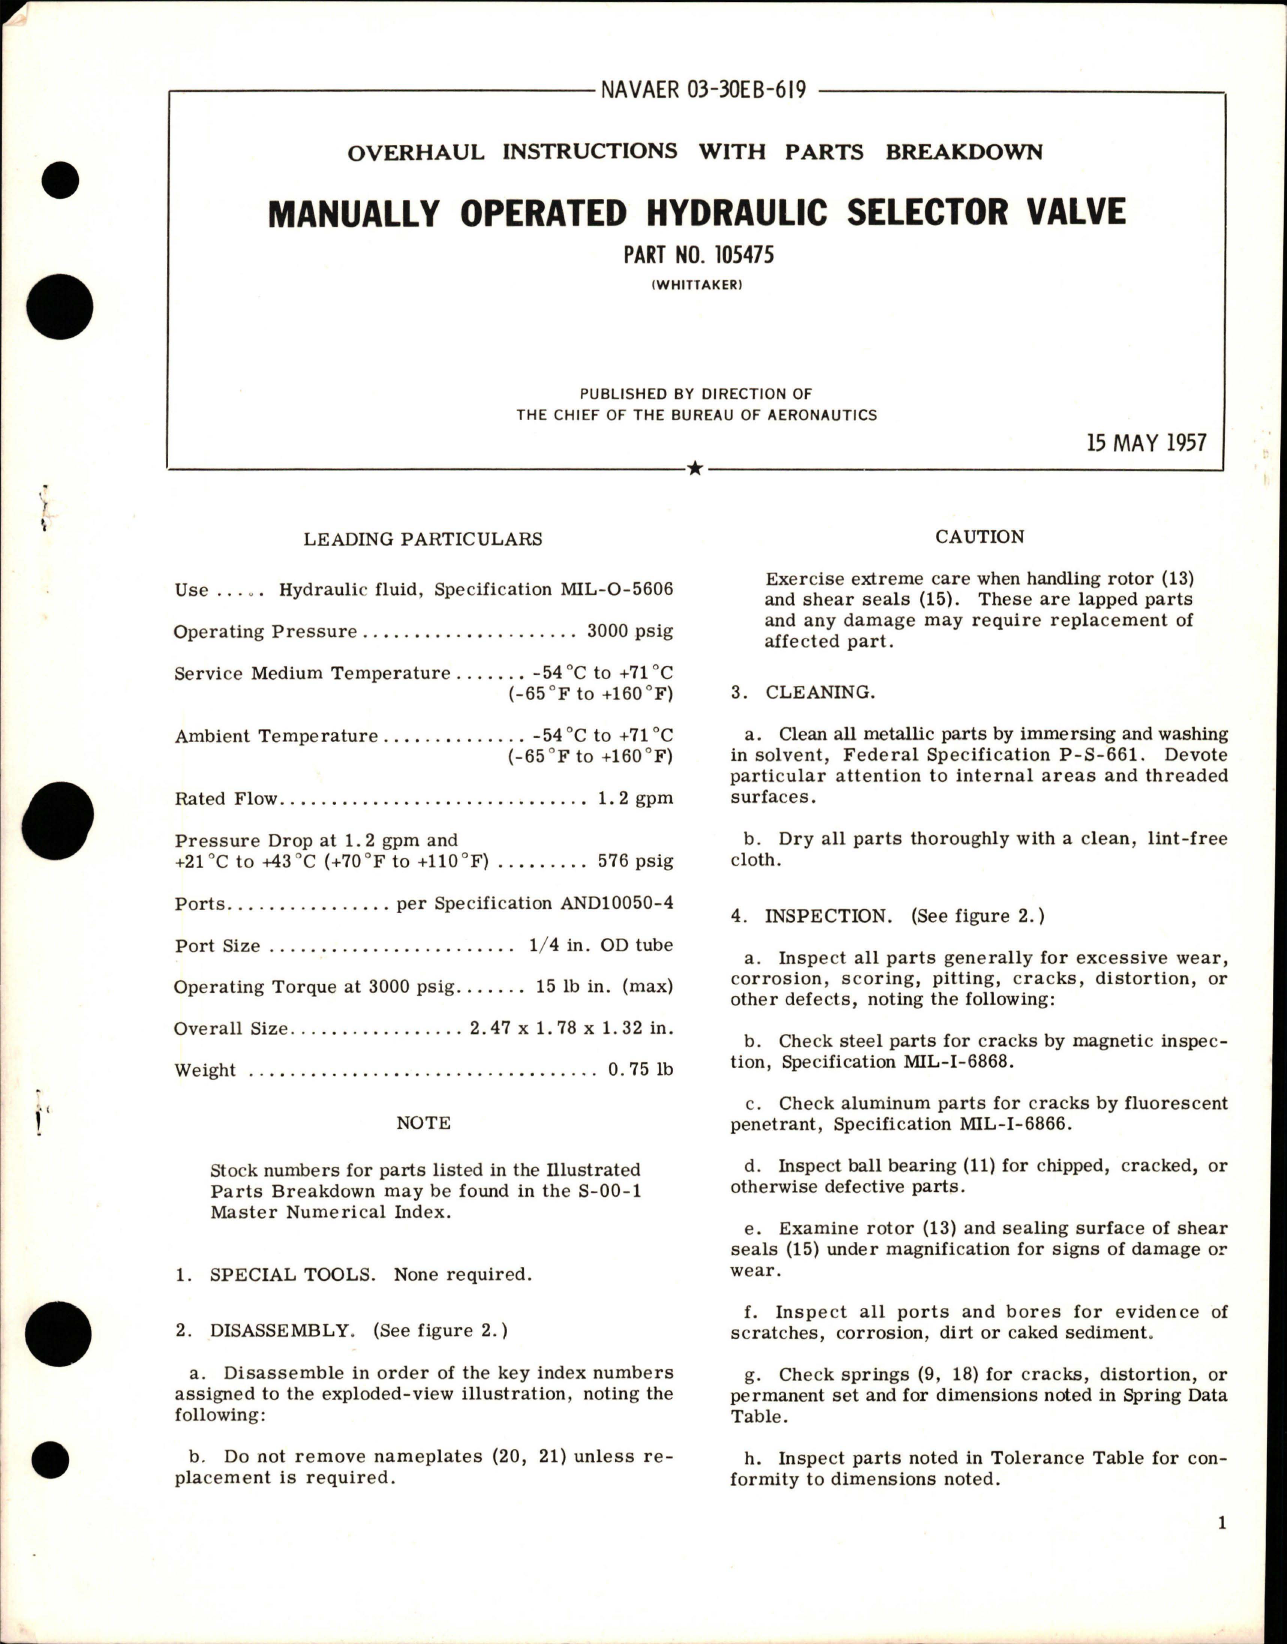 Sample page 1 from AirCorps Library document: Overhaul Instructions with Parts for Manually Operated Hydraulic Selector Valve - Part 105475